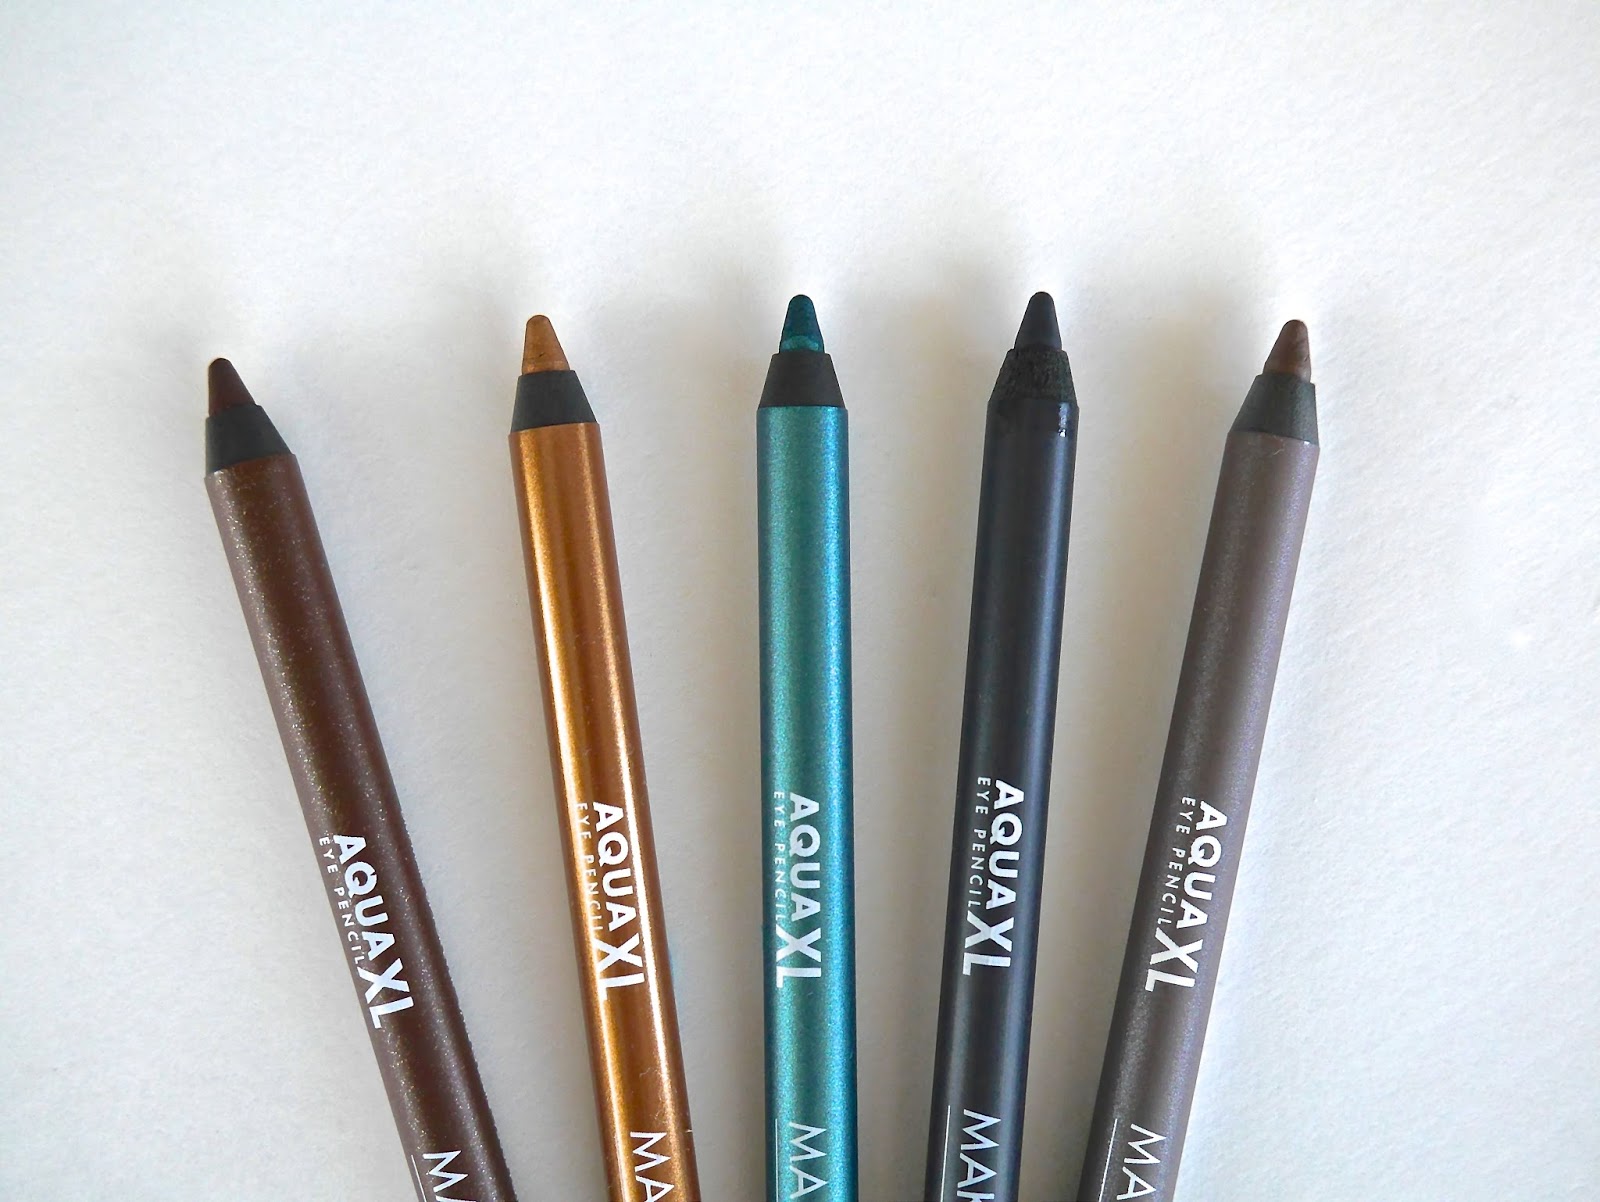 REVIEW: Make Up For Ever XL Eye Pencil Waterproof Eyeliner / Reflection of Sanity